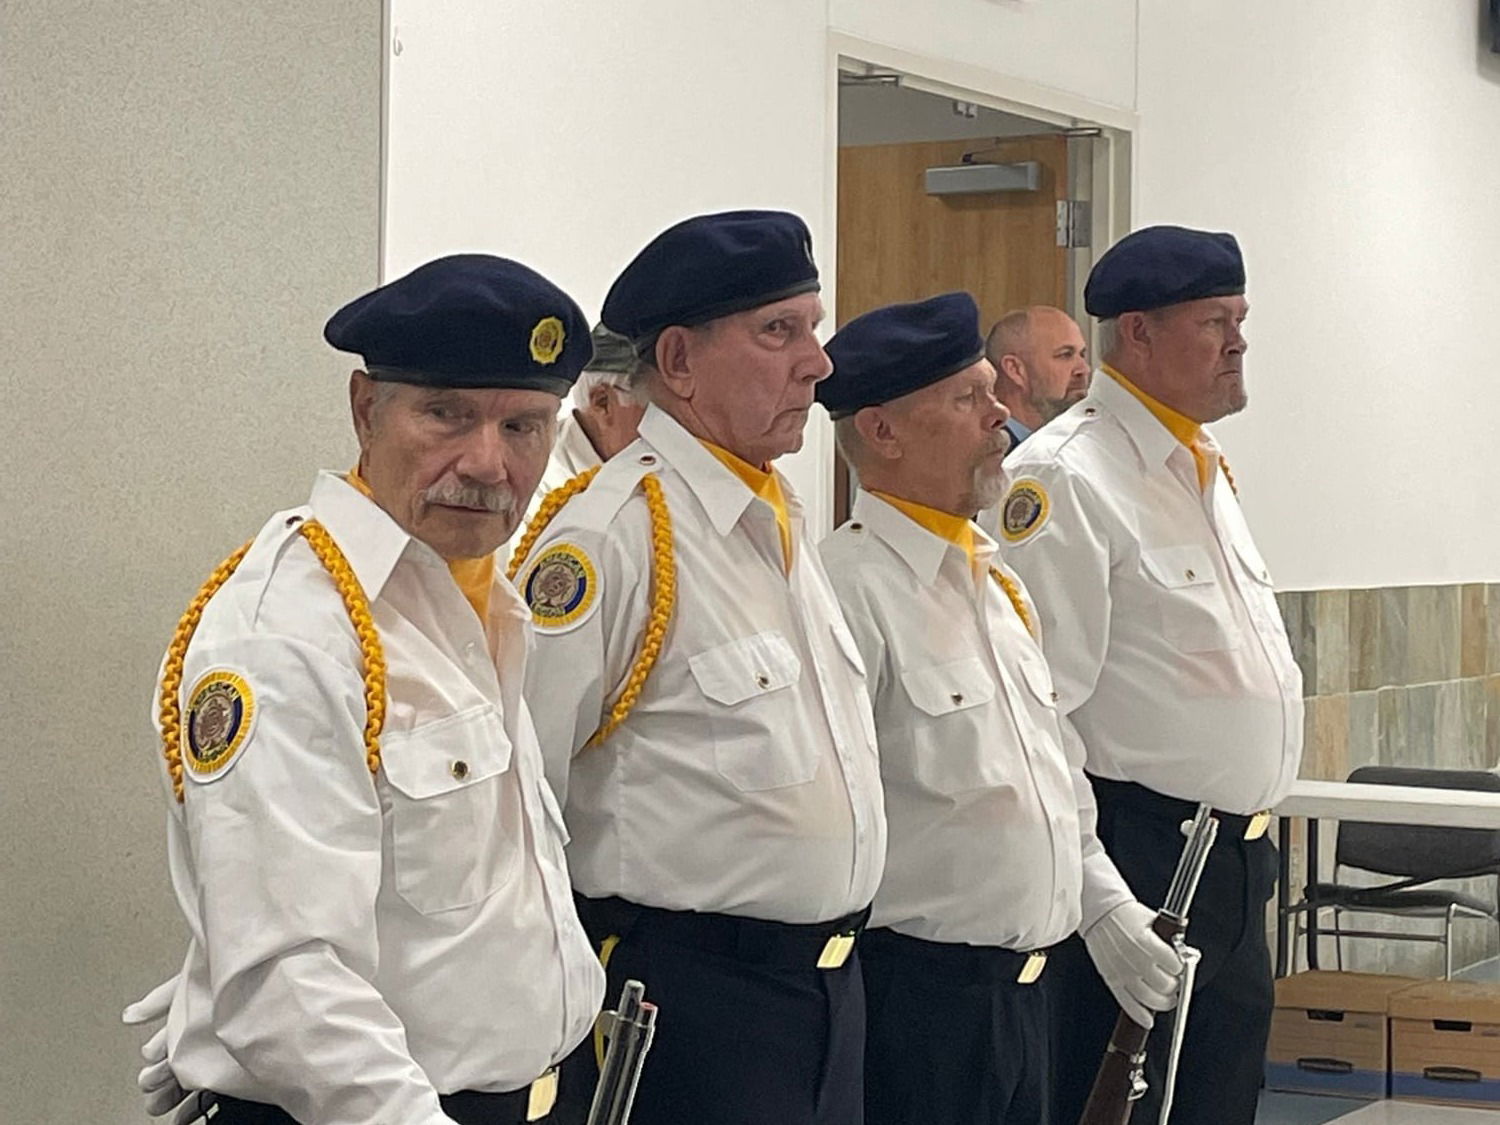 Post 95 Honor Guard Preparing to post colors at the HEARTS Museum